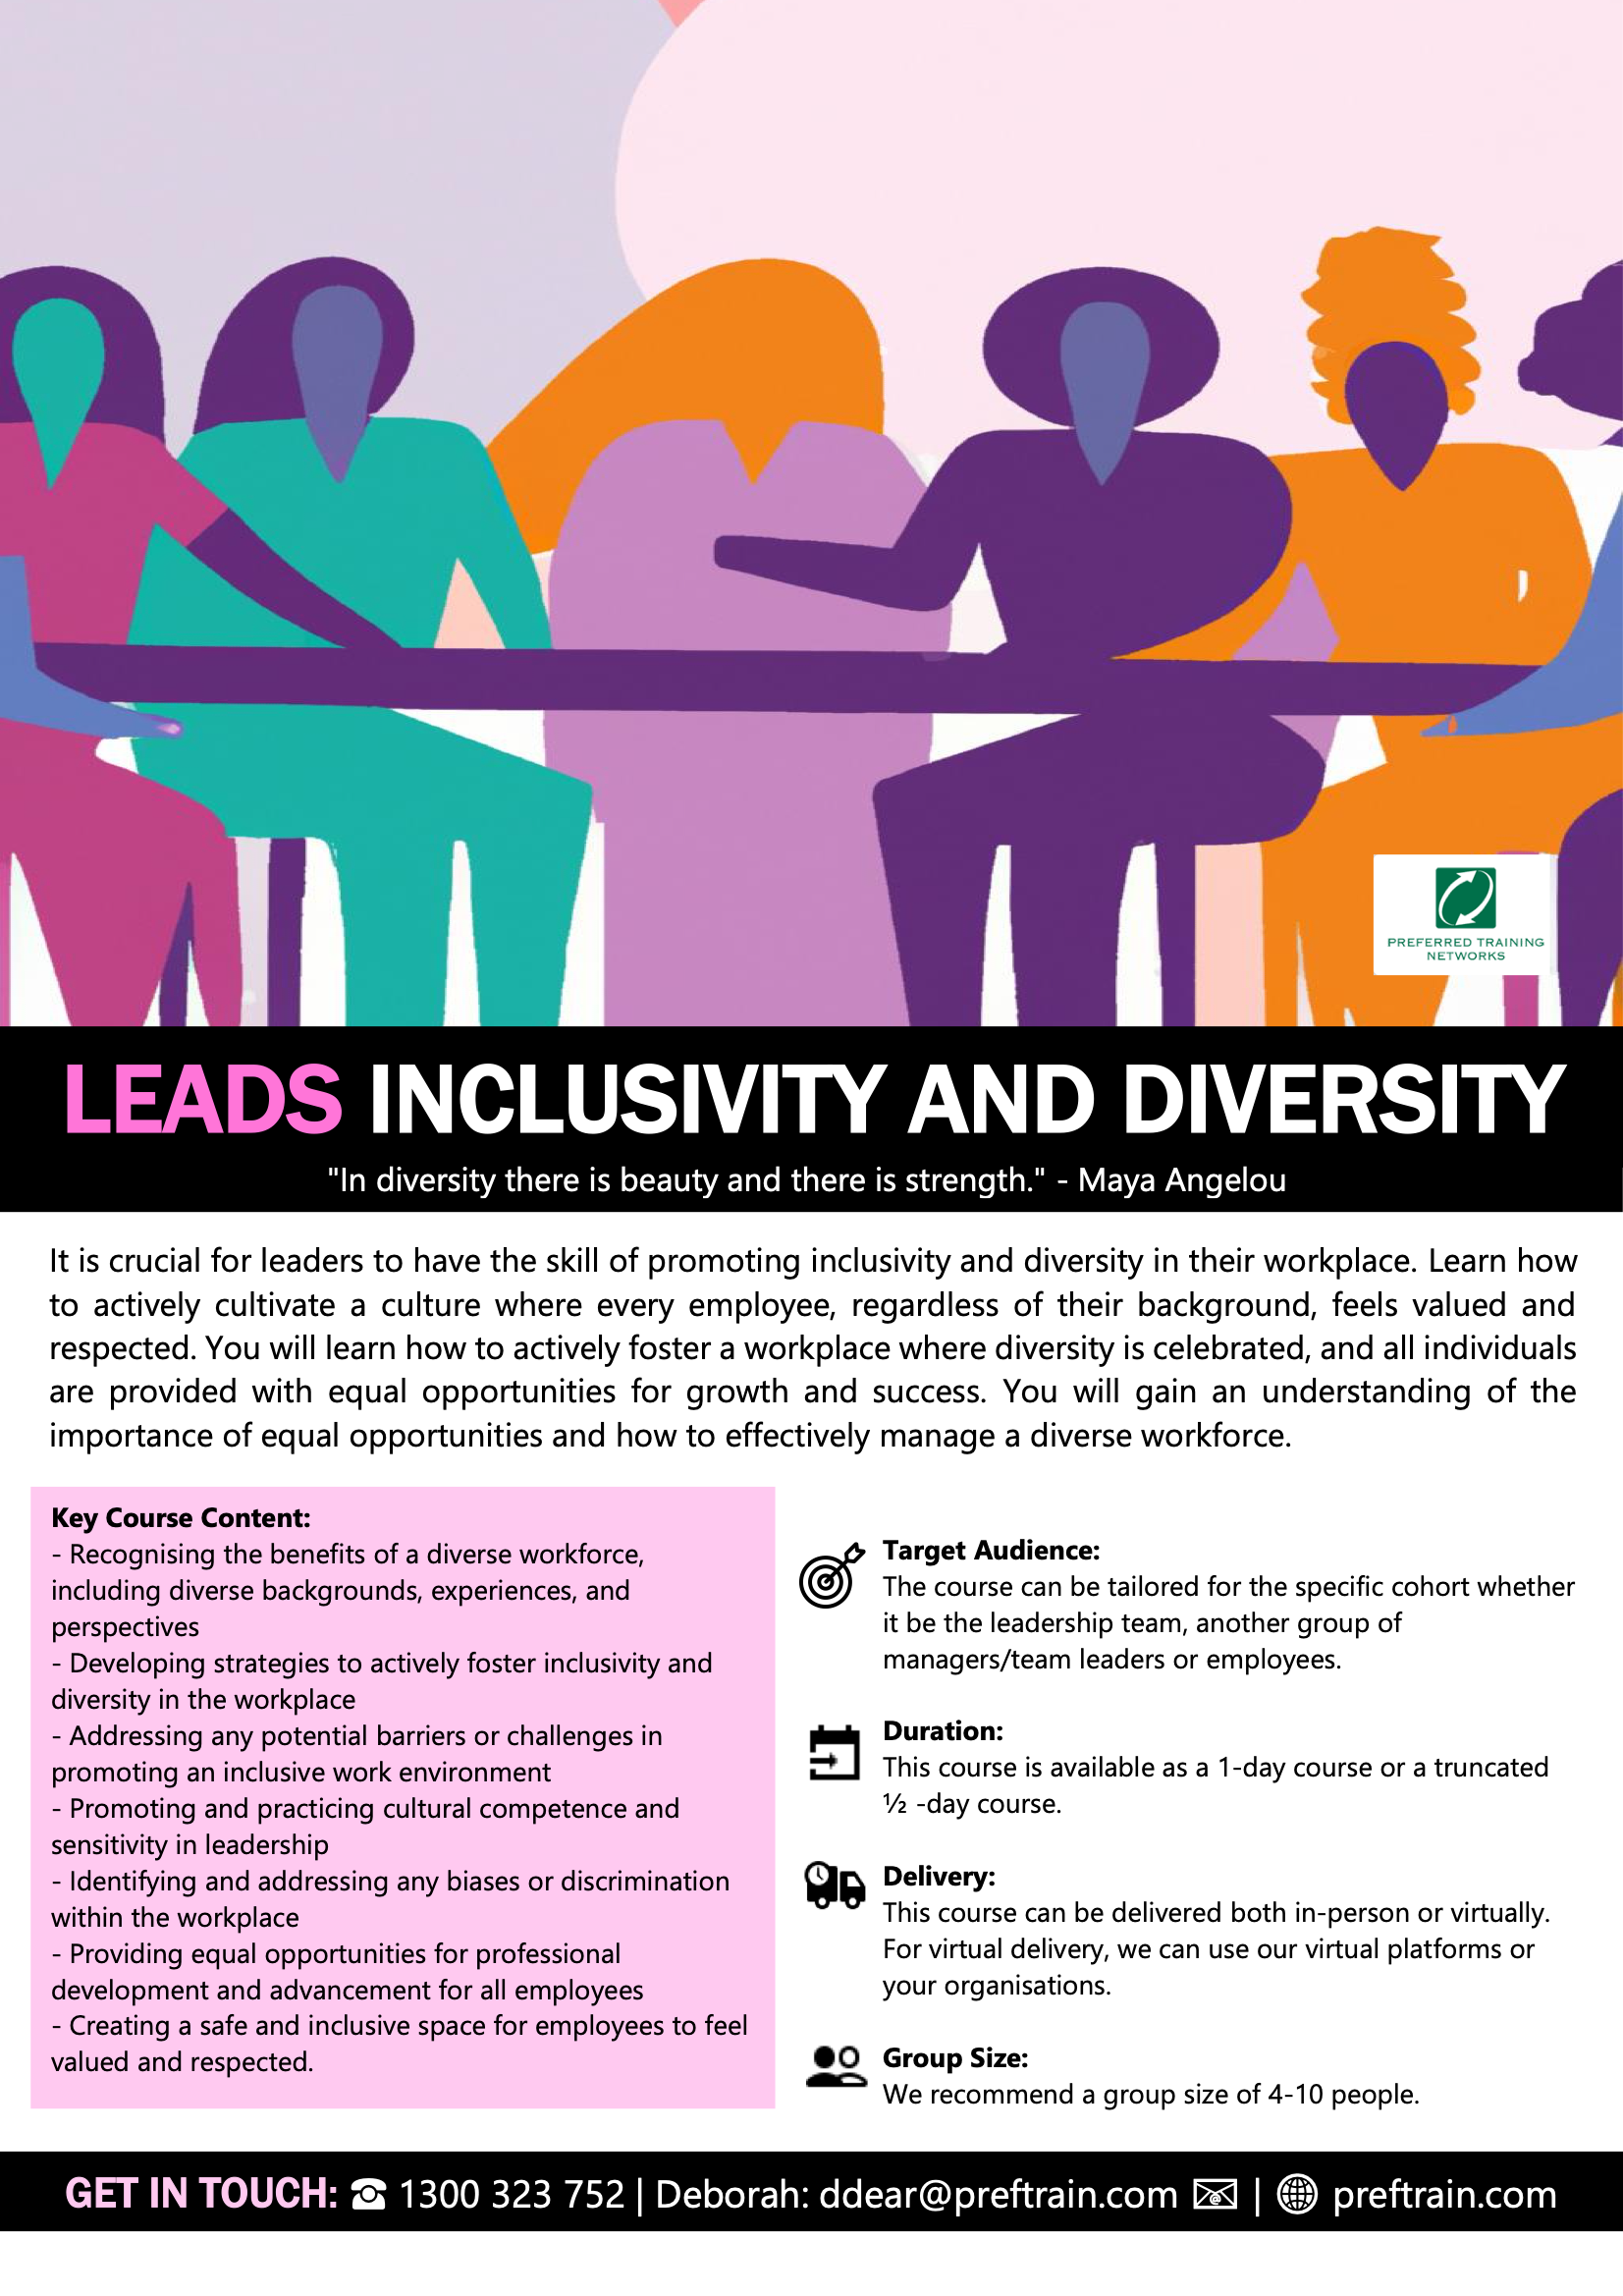 Leads Inclusivity and Diversity